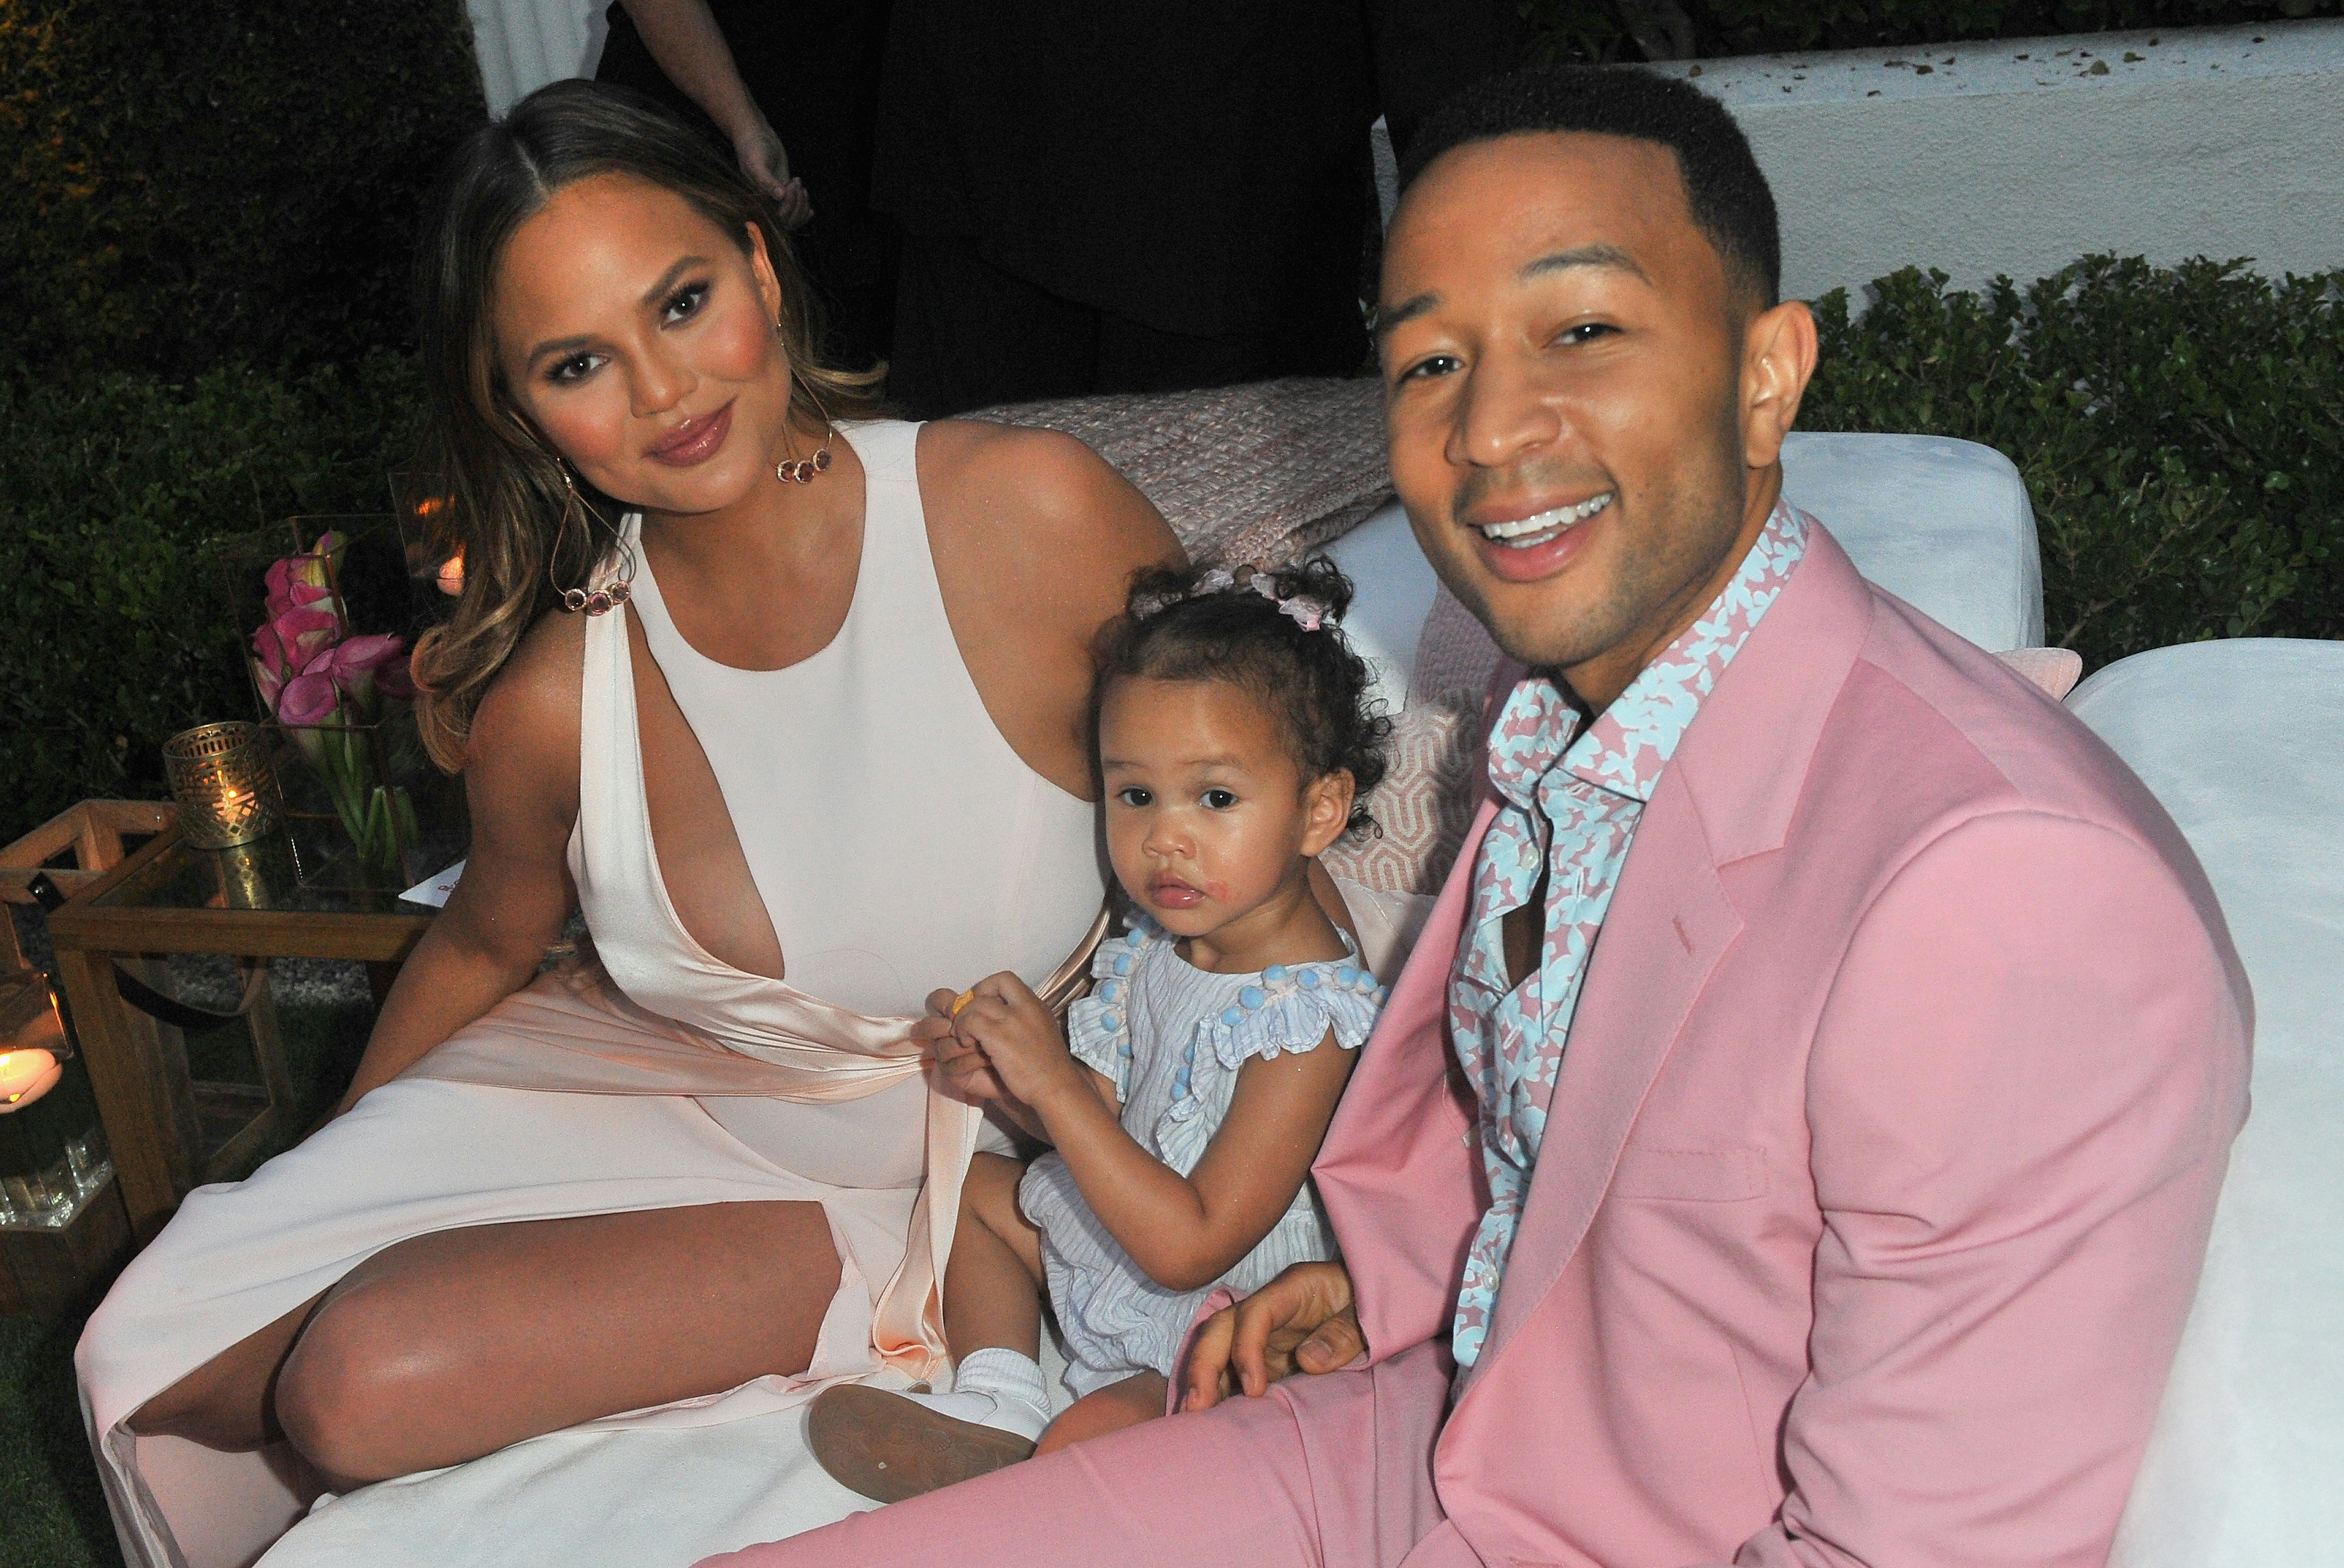 Chrissy Teigen Shares Adorable Family Photos Featuring Her 4 Kids